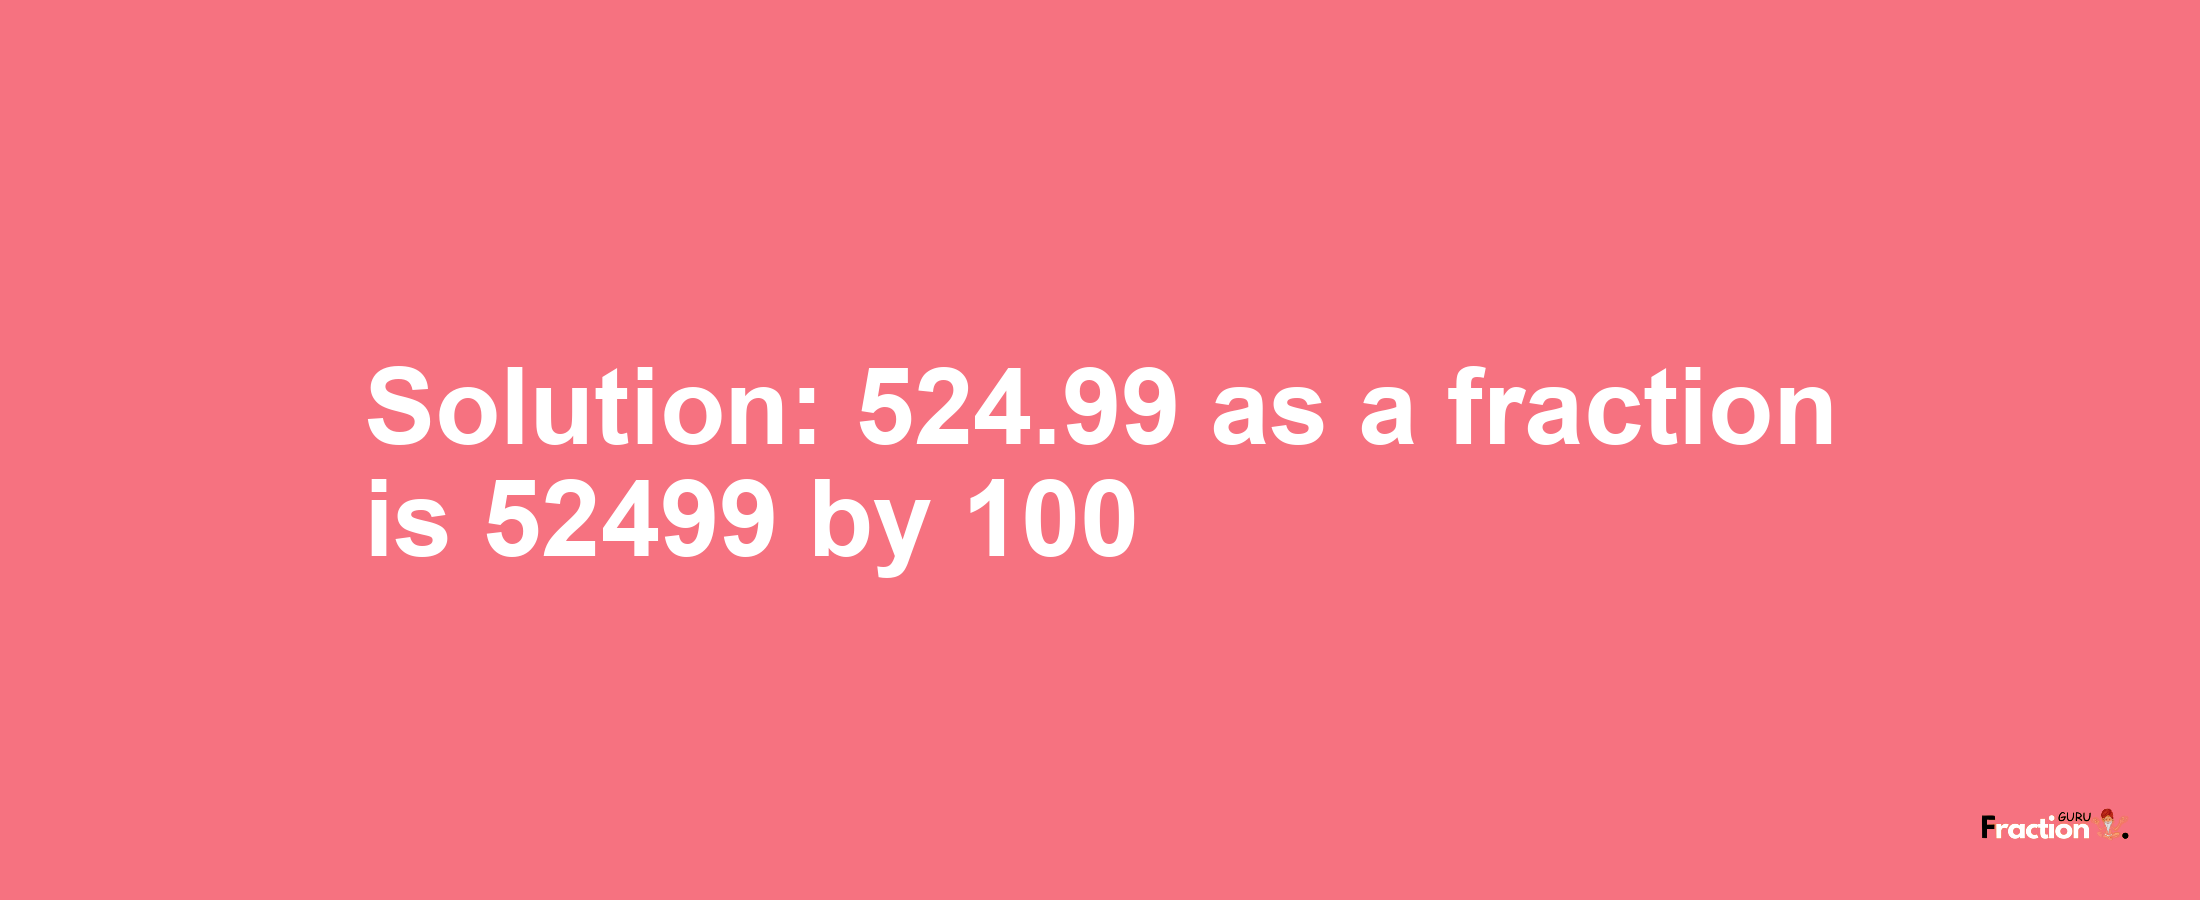 Solution:524.99 as a fraction is 52499/100